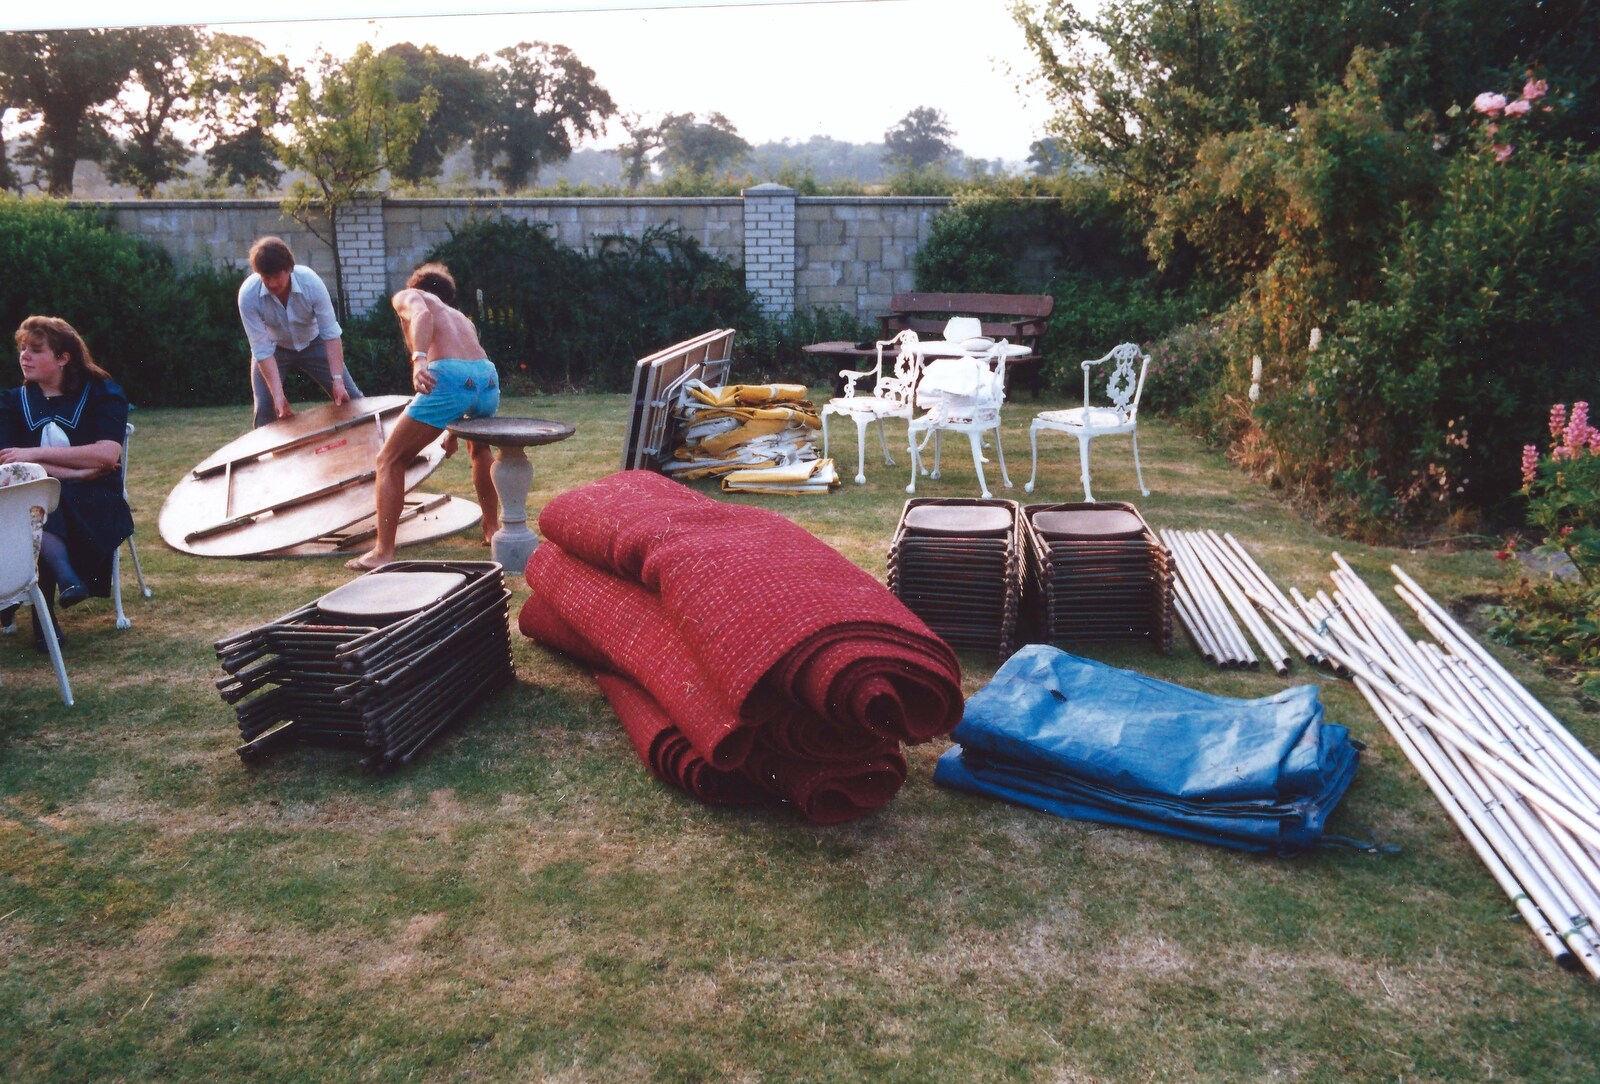 A wedding marquee kit is laid out on the lawn from Mother and Mike's Wedding Reception, Bransgore, Dorset - 20th August 1988